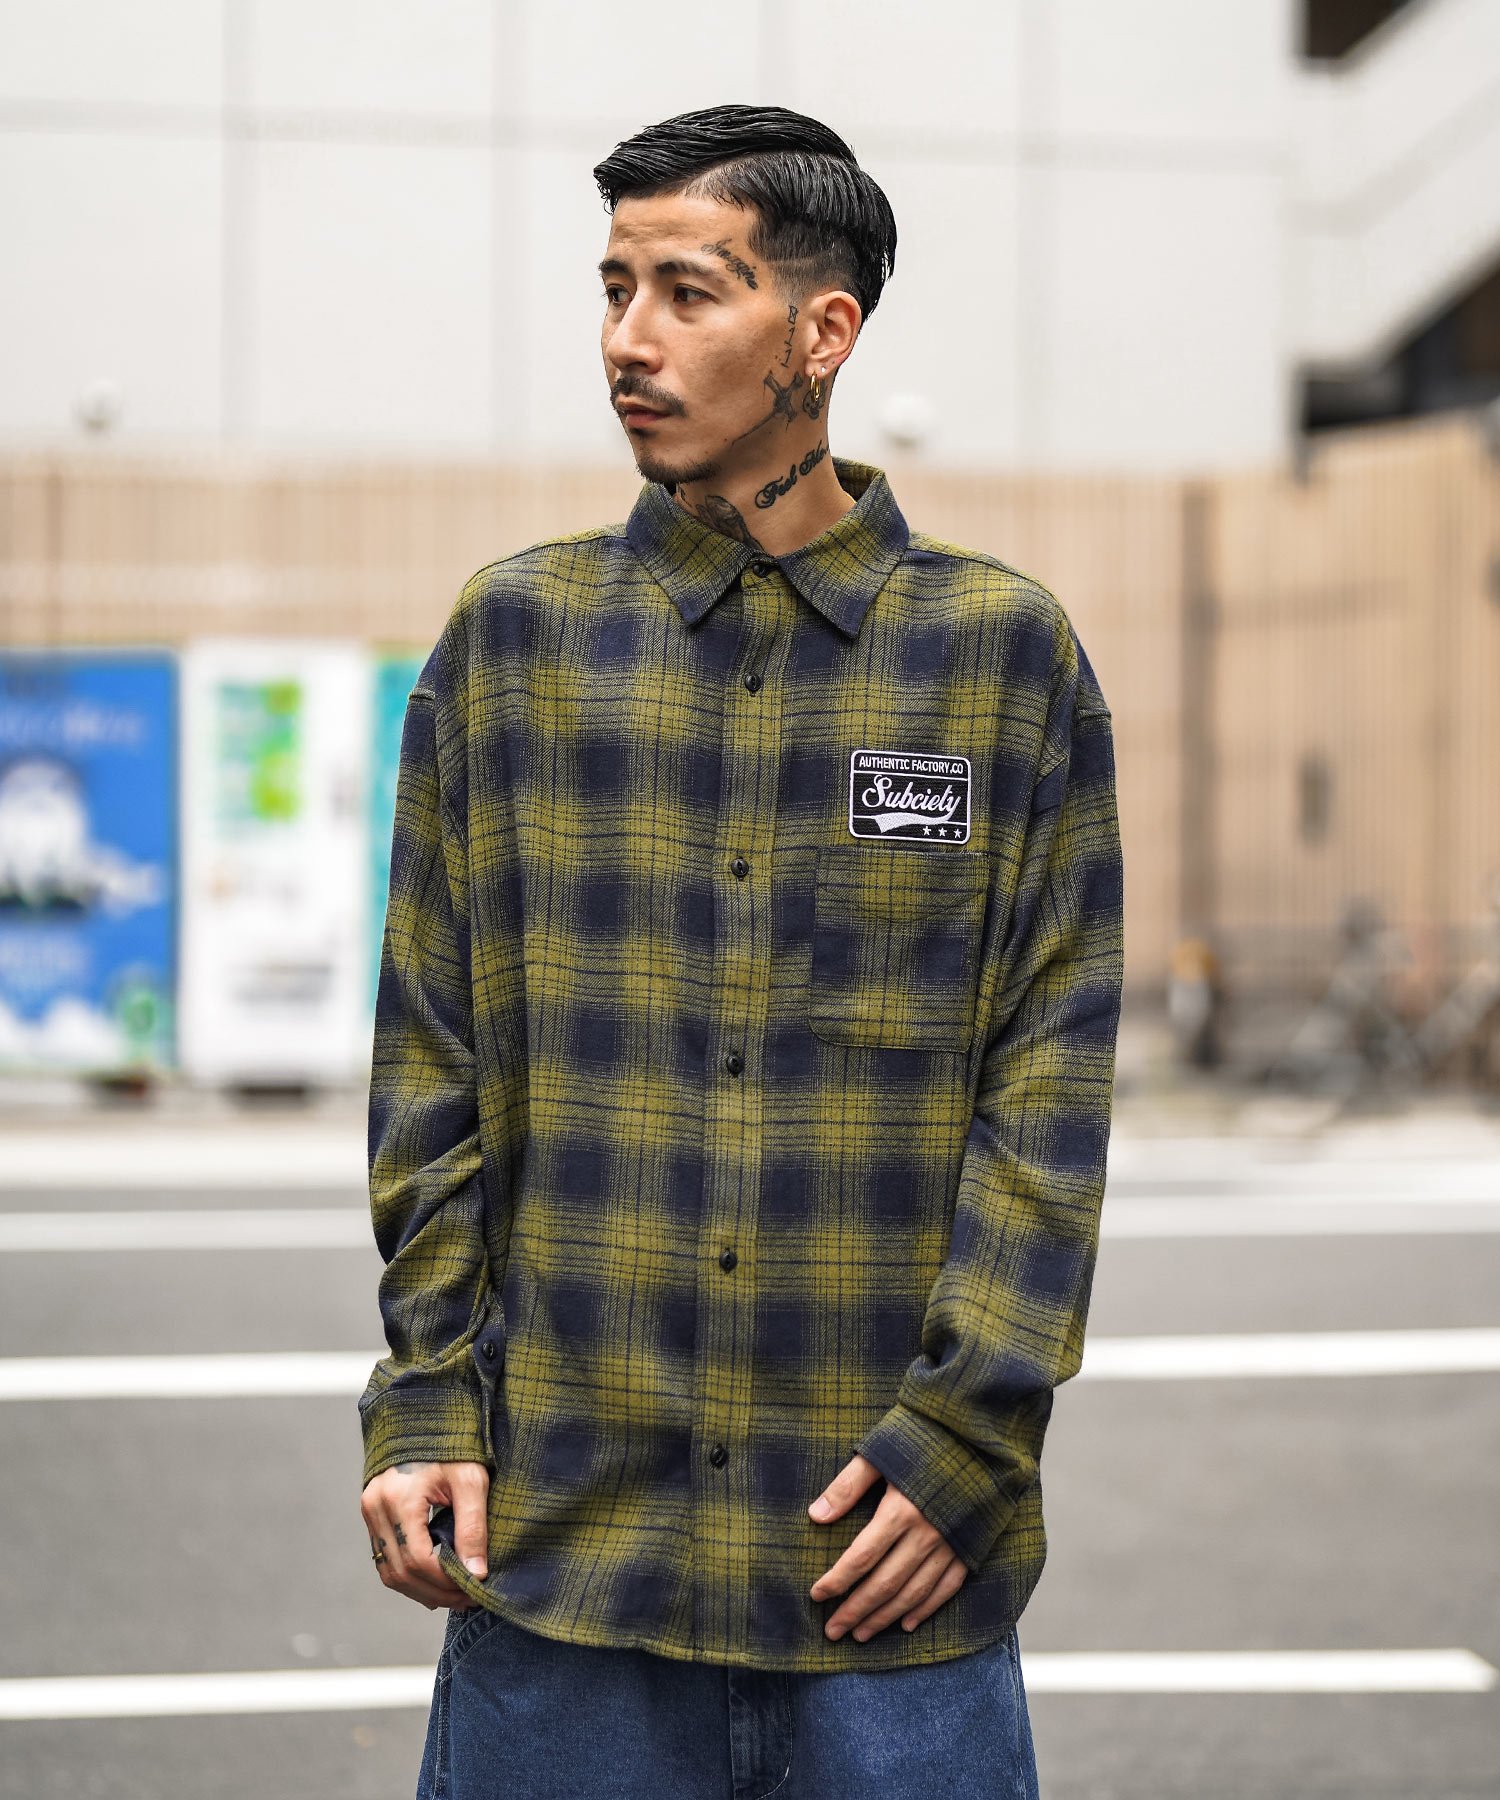 EMBLEM CHECK SHIRT - Subciety Online Store